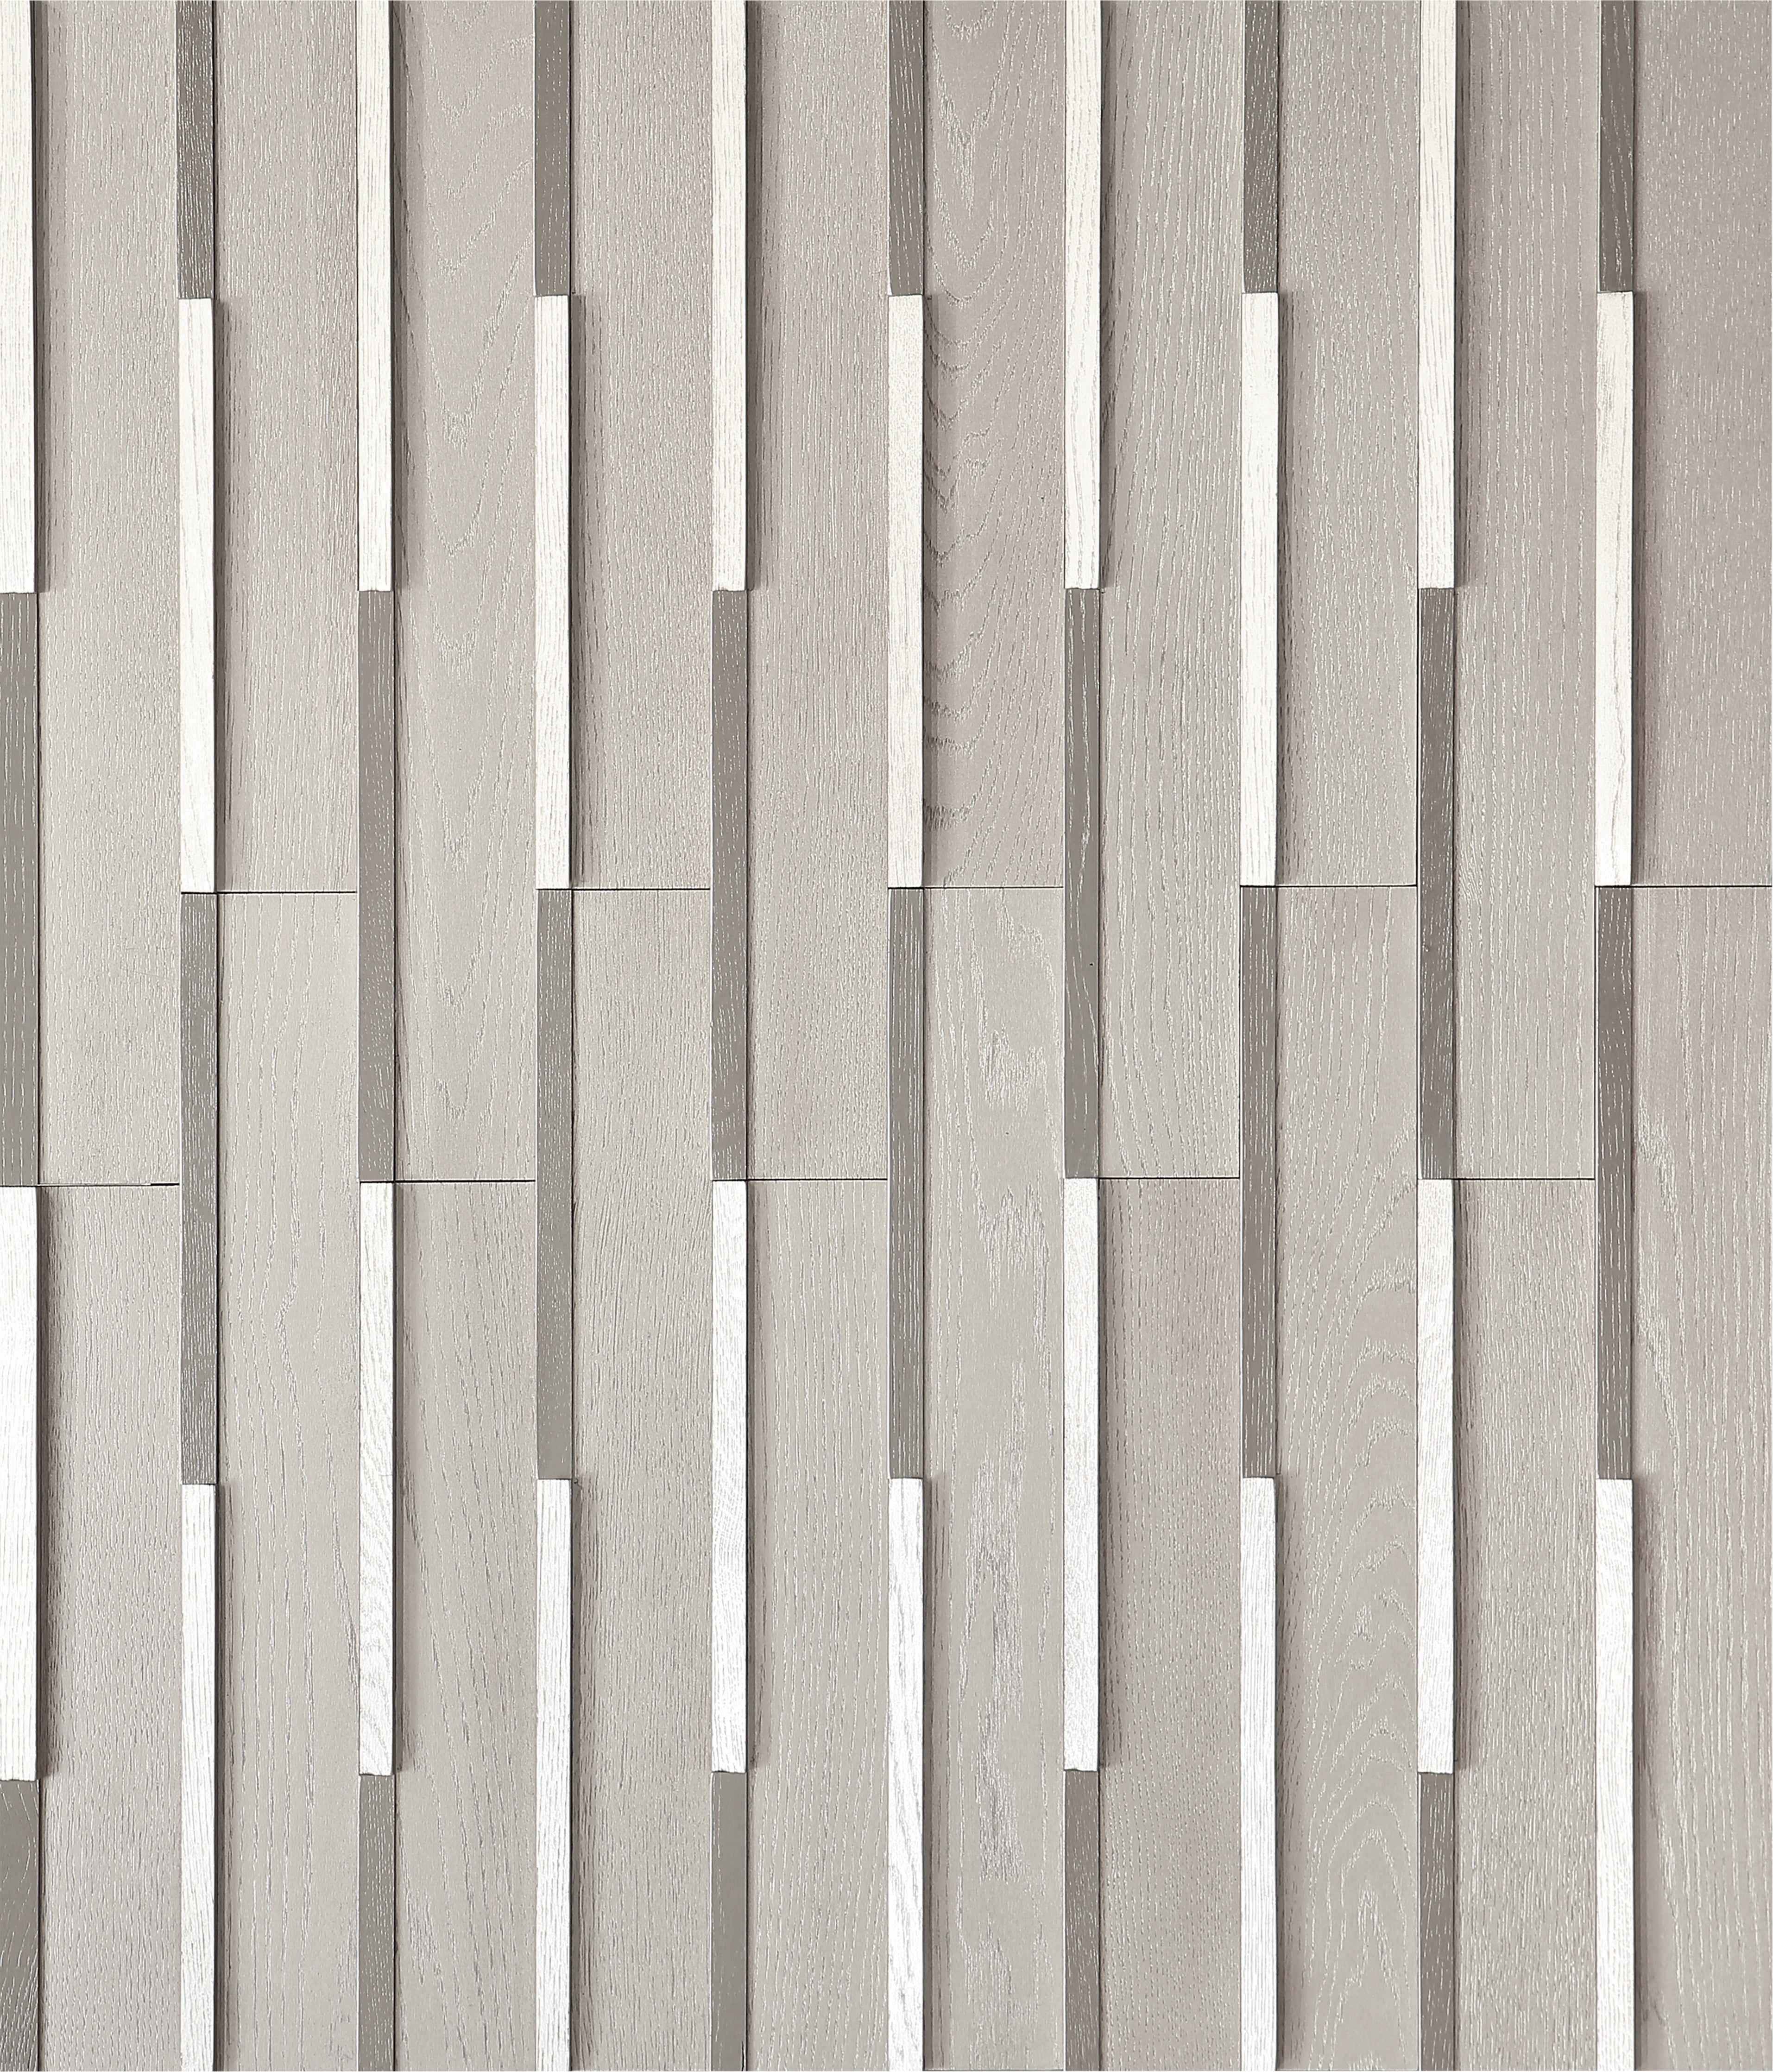 duchateau inceptiv edge silver oak three dimensional wall natural wood panel lacquer for interior use distributed by surface group international